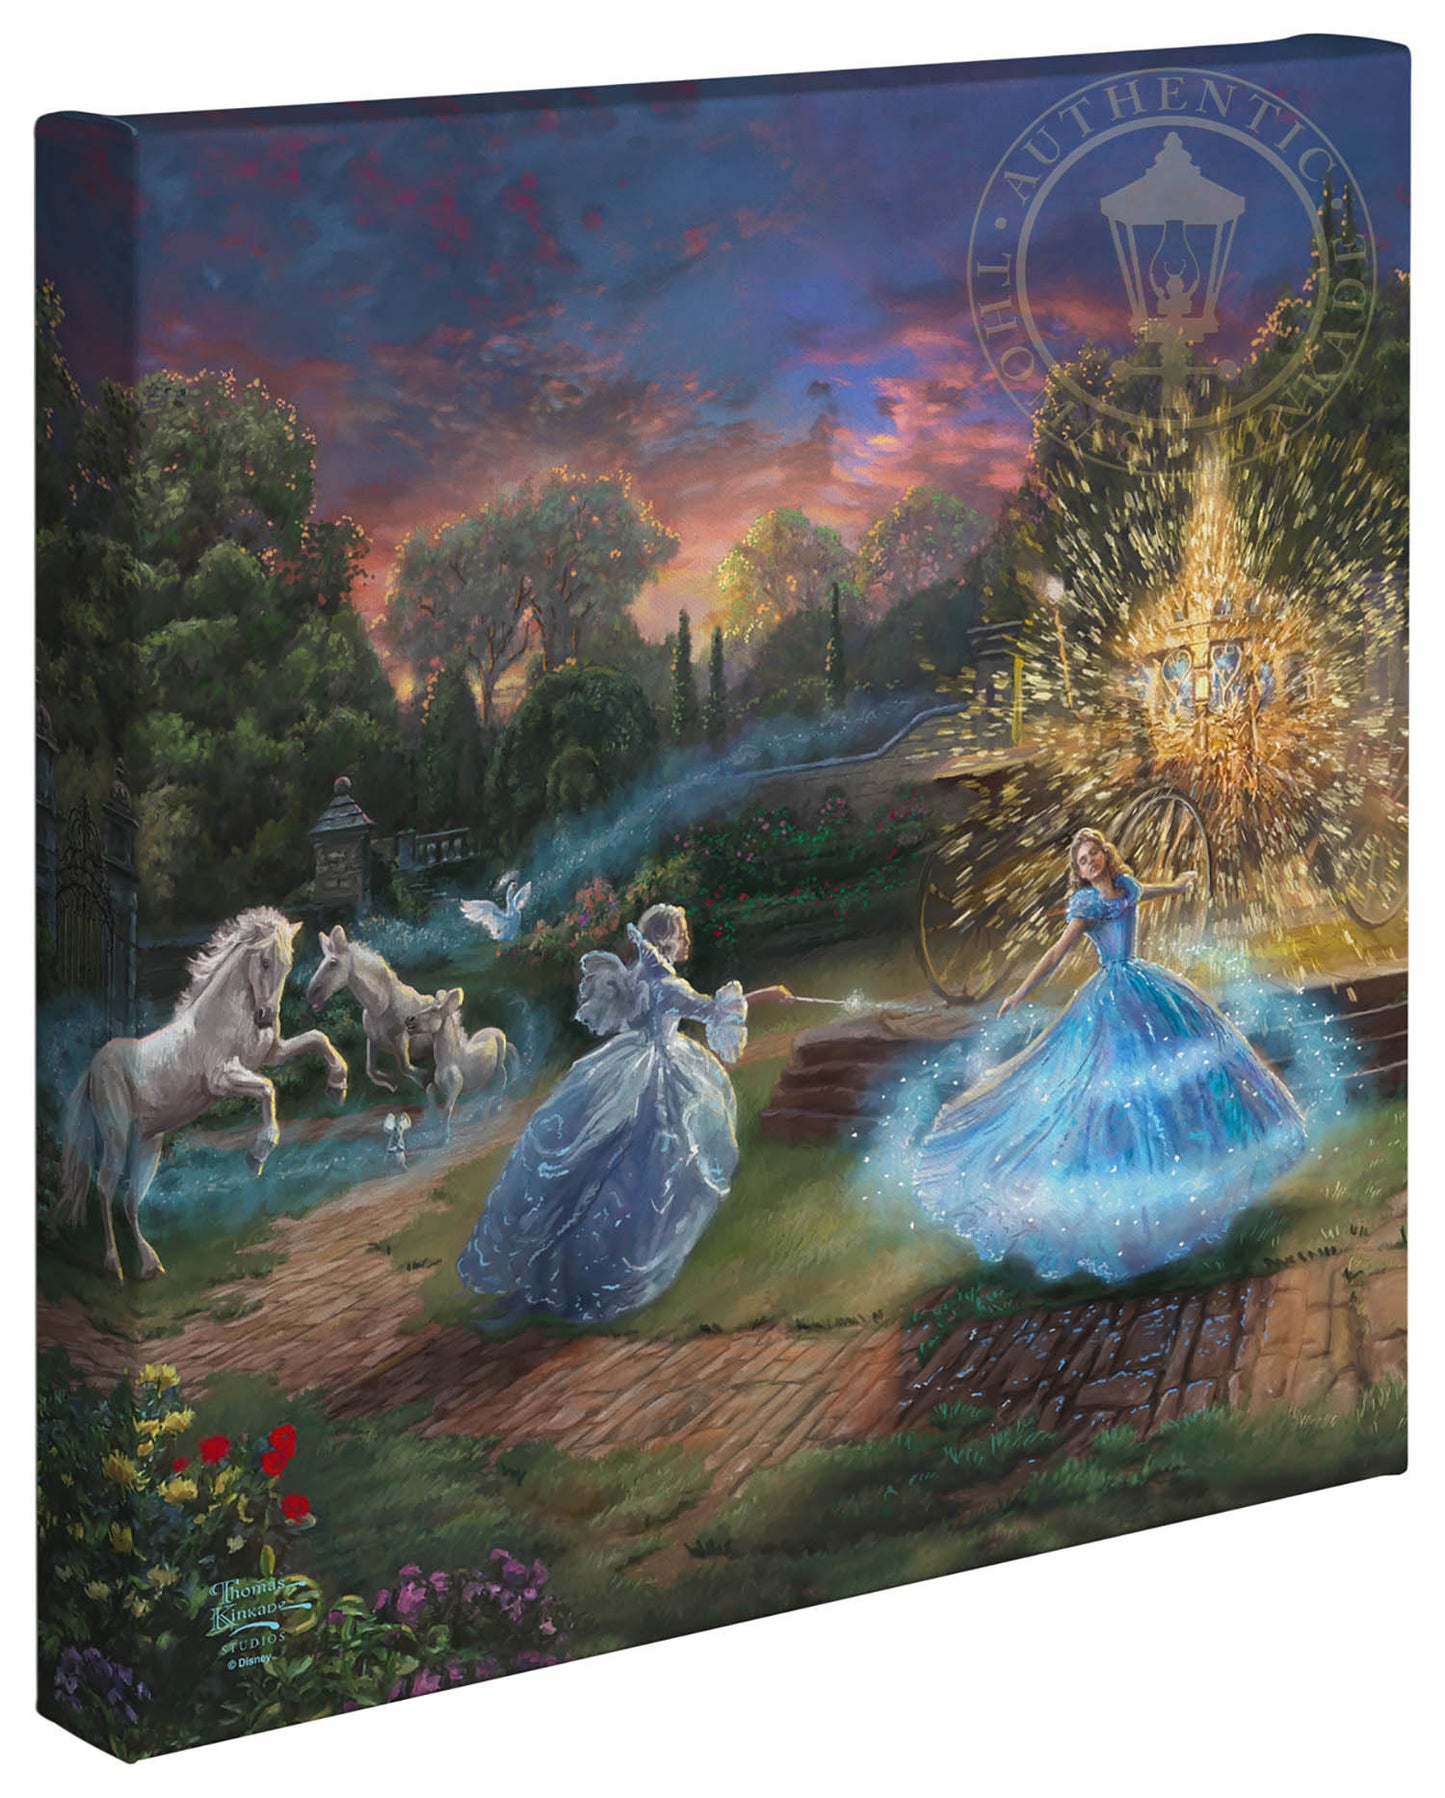 Thomas Kinkade Disney Dreams "Wishes Granted" Limited and Open Canvas Giclee